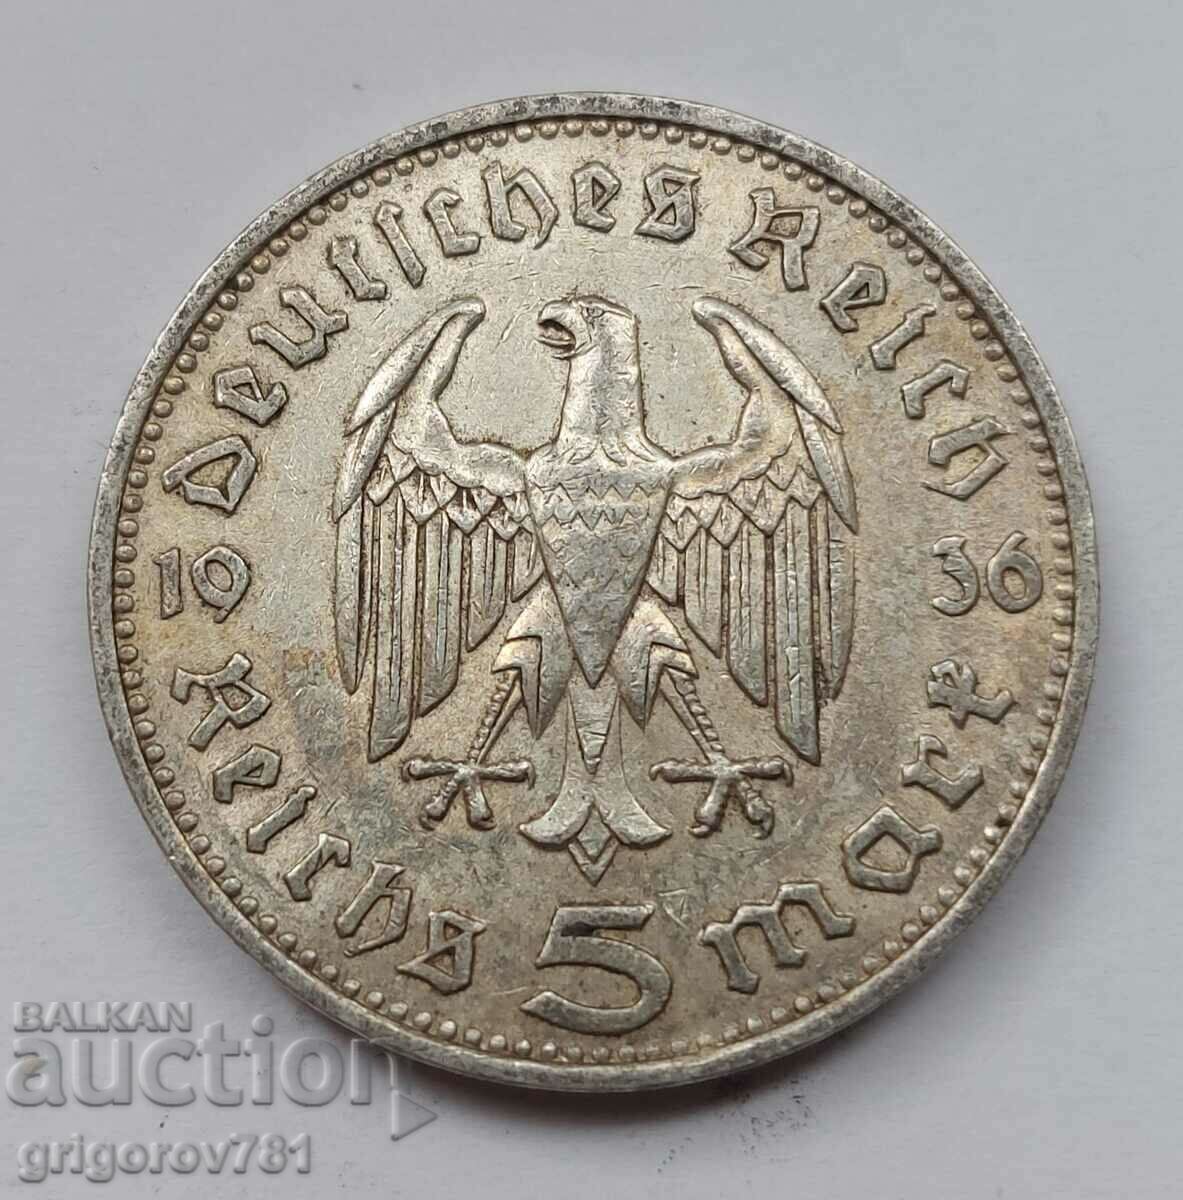 5 Mark Silver Germany 1936 F III Reich Silver Coin #11